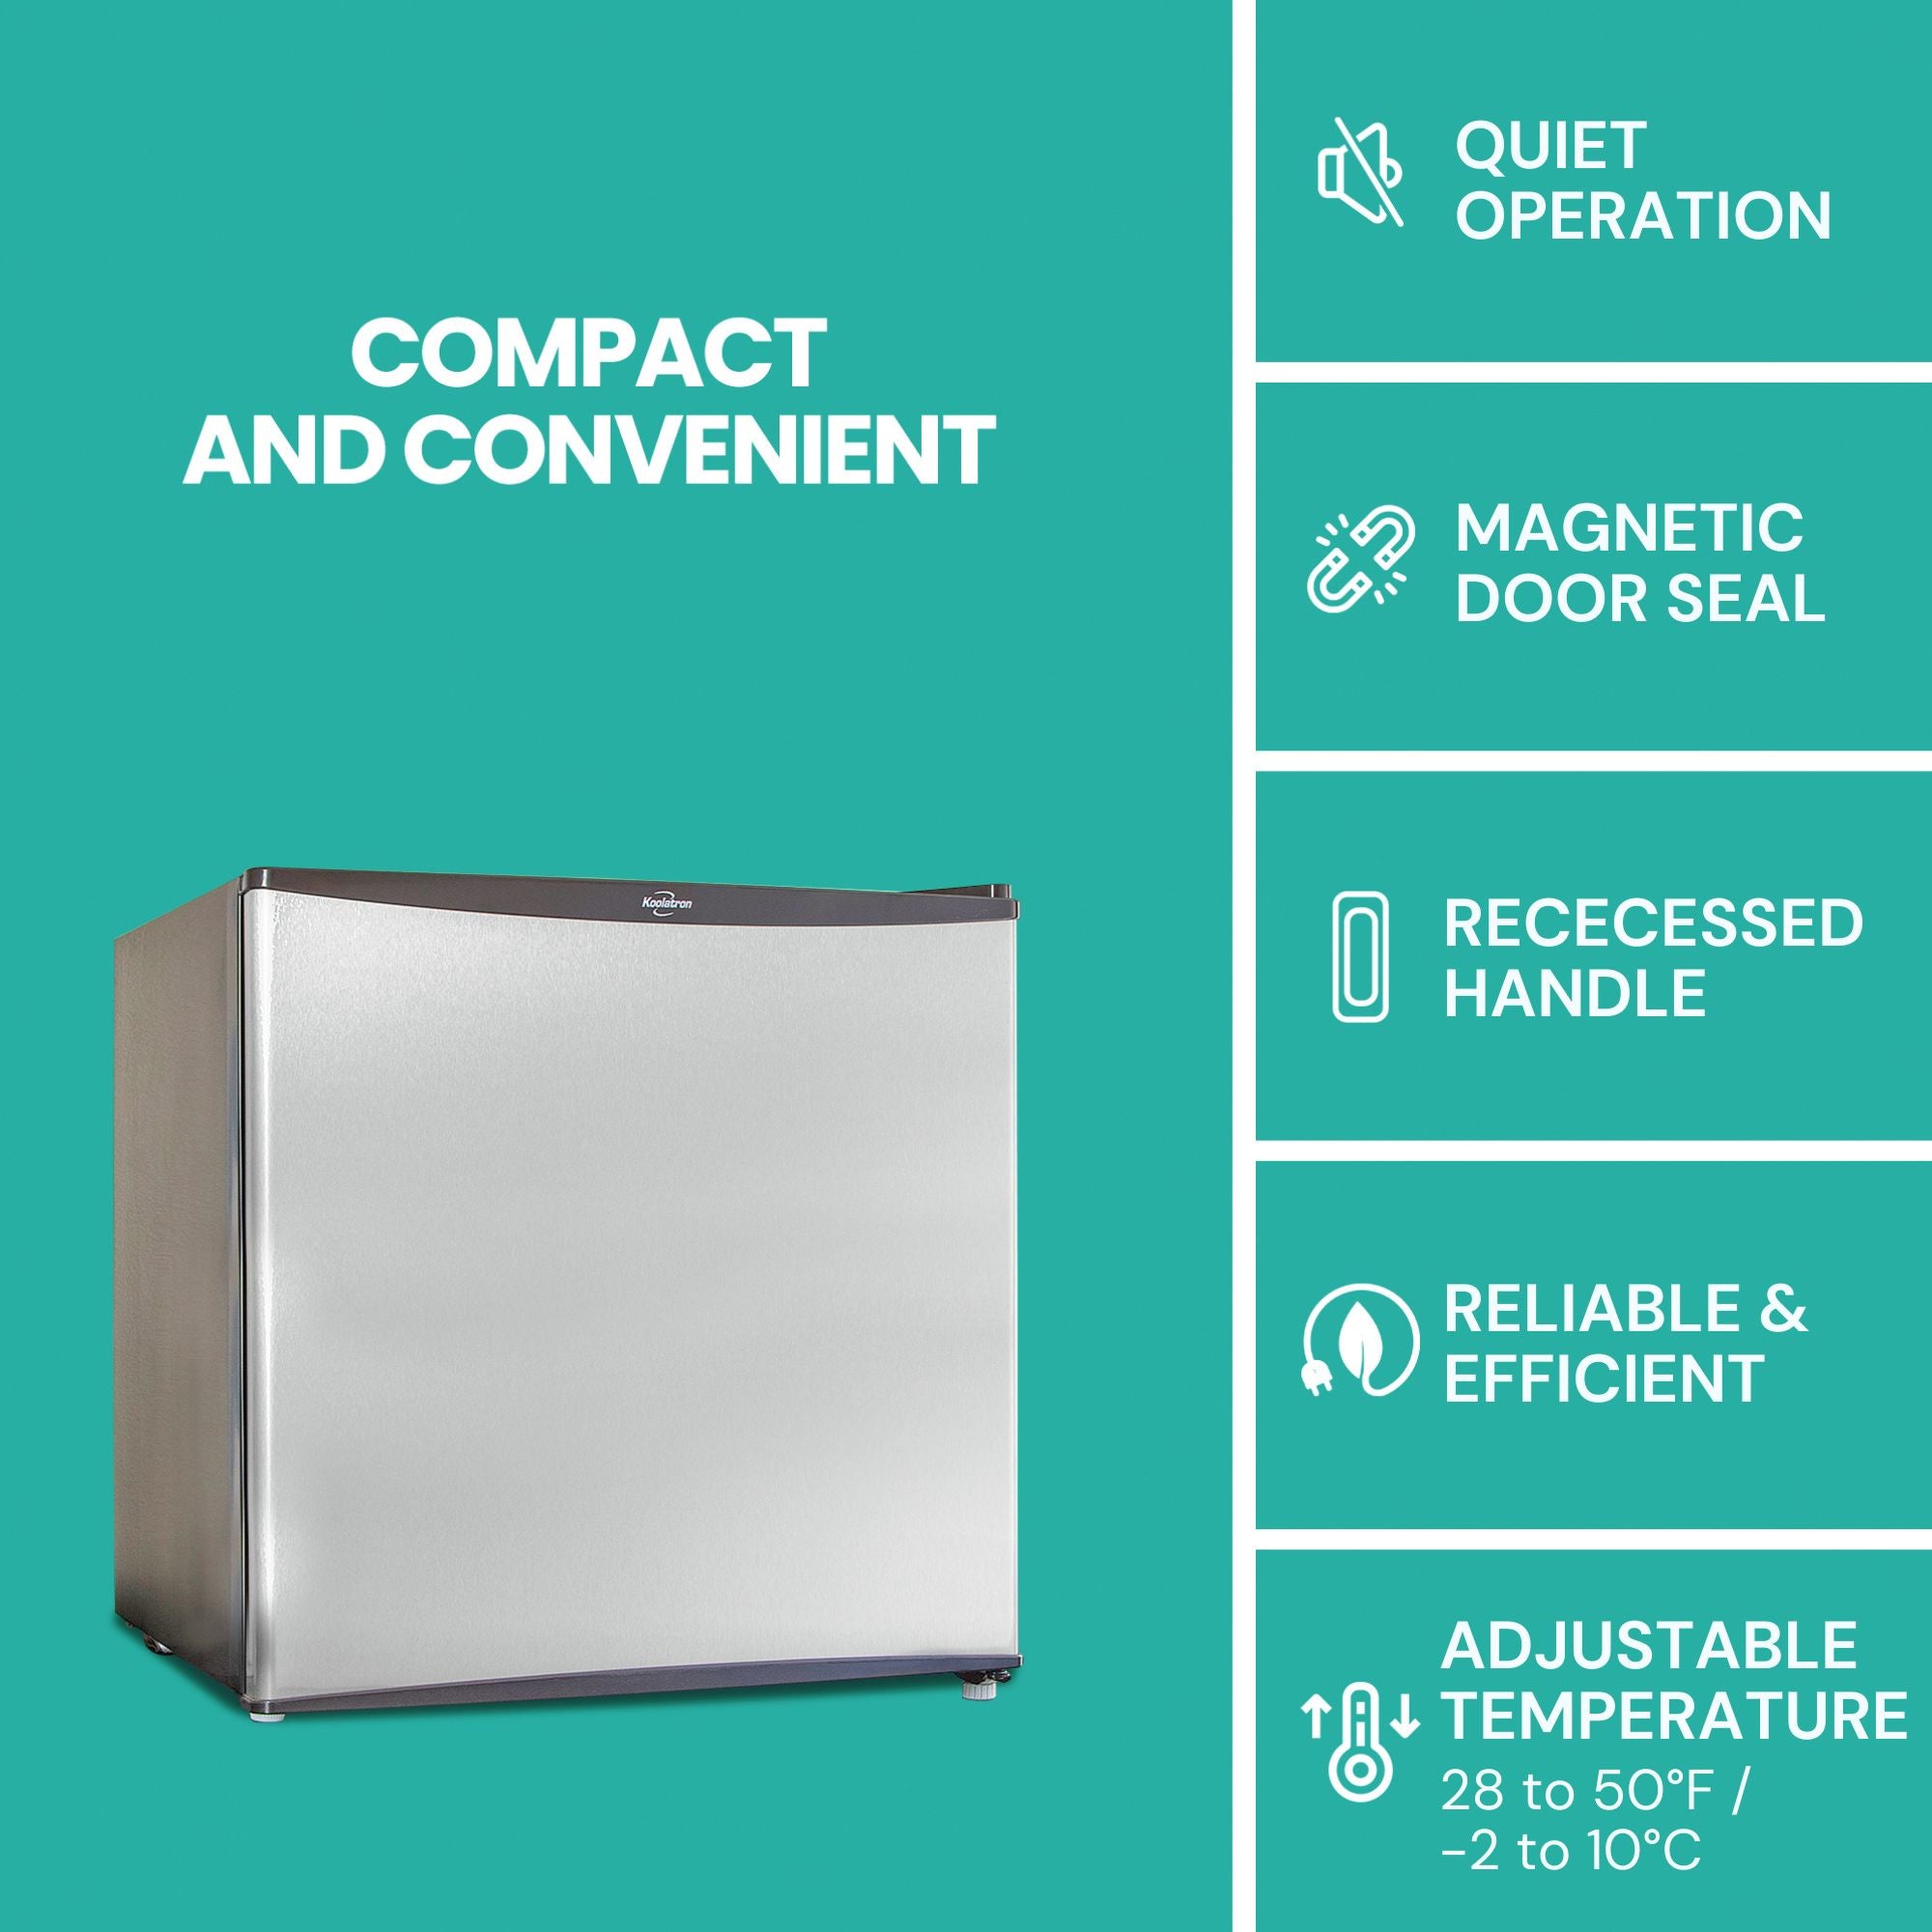 Compact fridge with freezer on an aqua background with text above reading, "Compact and convenient." Icons and text to the right describe features: Quiet operation; magnetic door seal; recessed handle; reliable and efficient; adjustable temperature 28 to 50°F / -2 to 10°C